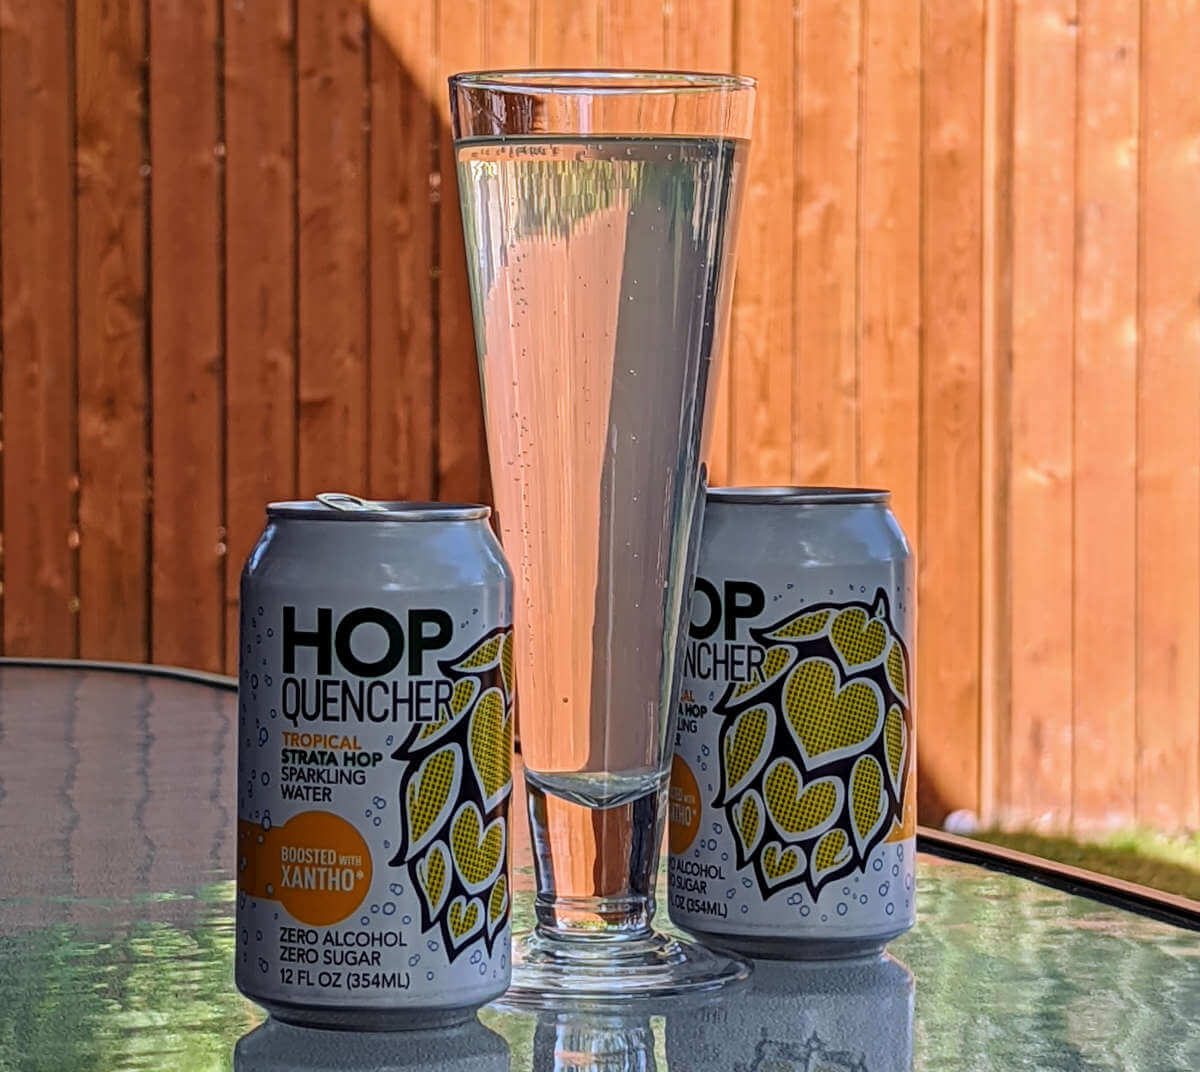 Latest print article: Exploring hop water with Worthy Brewing’s new Hop Quencher